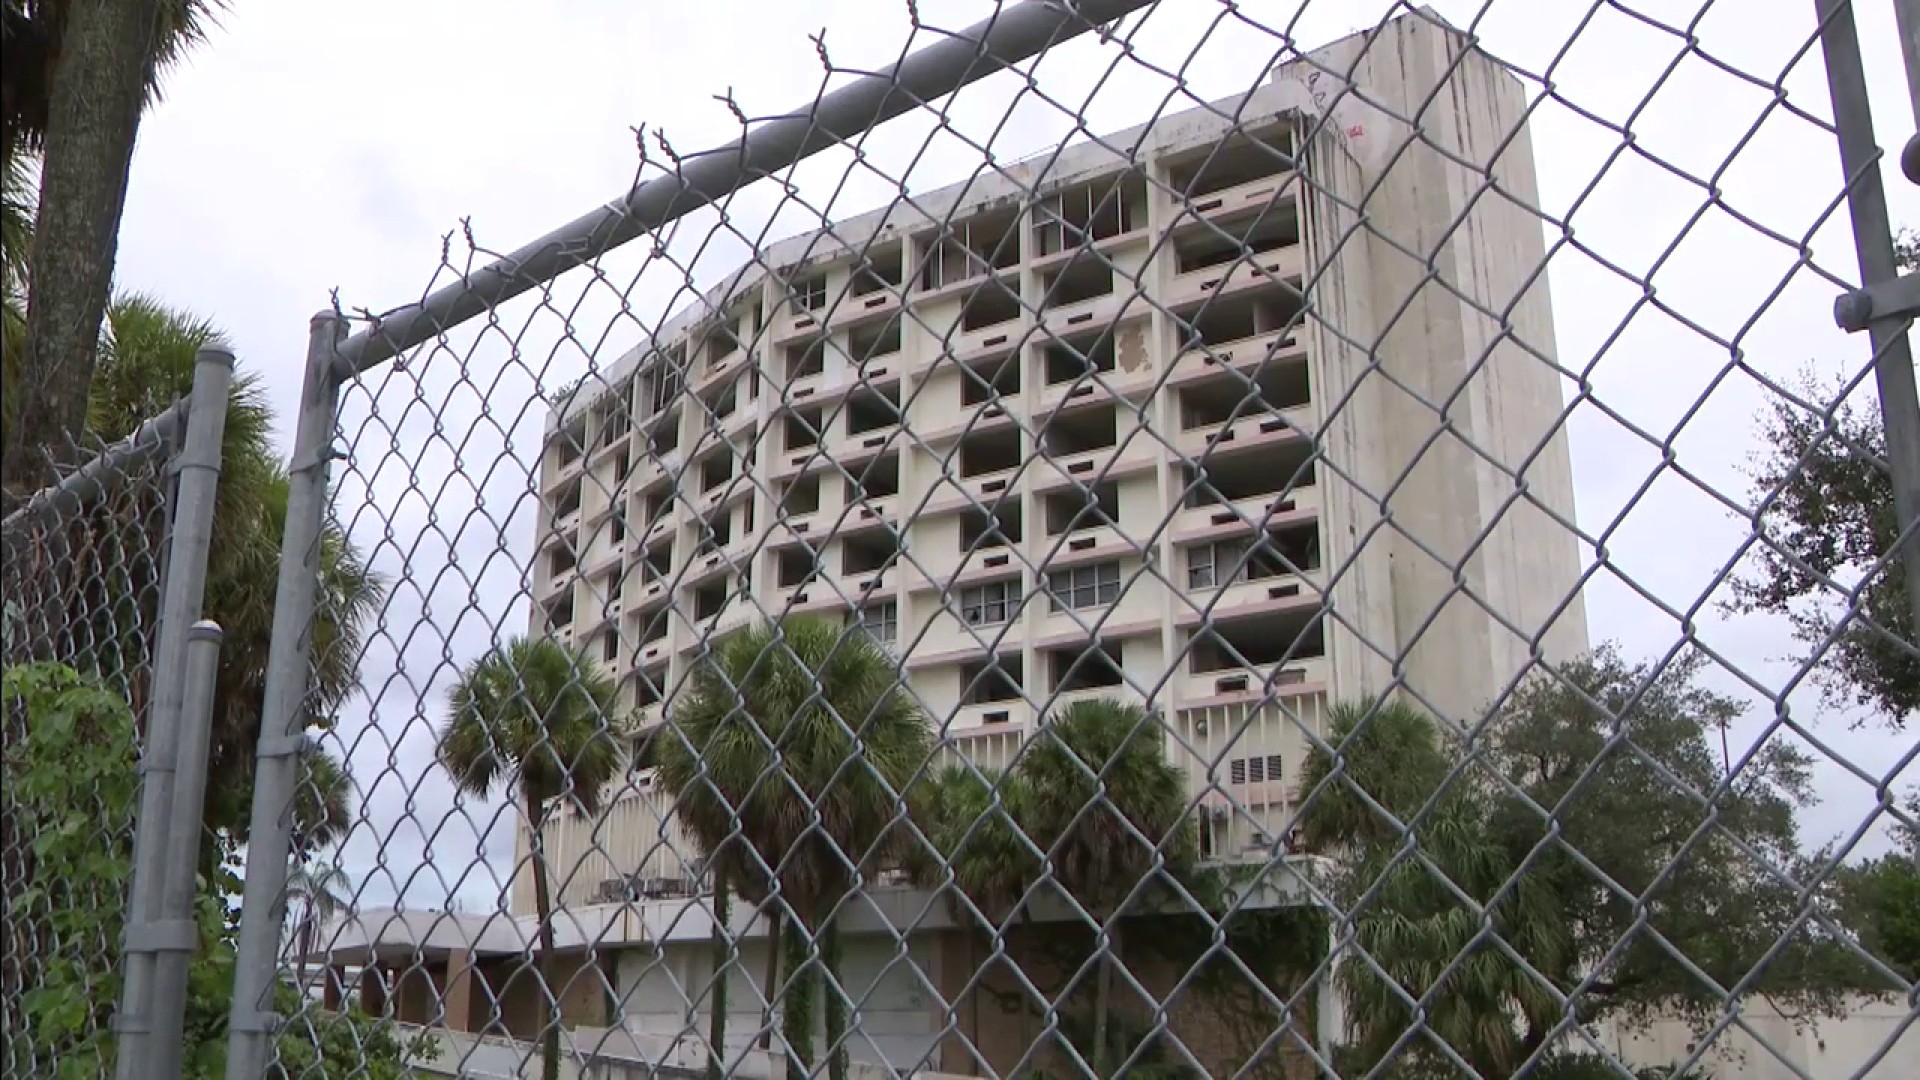 Deadly fall at abandoned Miami Gardens hospital raises old questions about  dangerous, dilapidated building